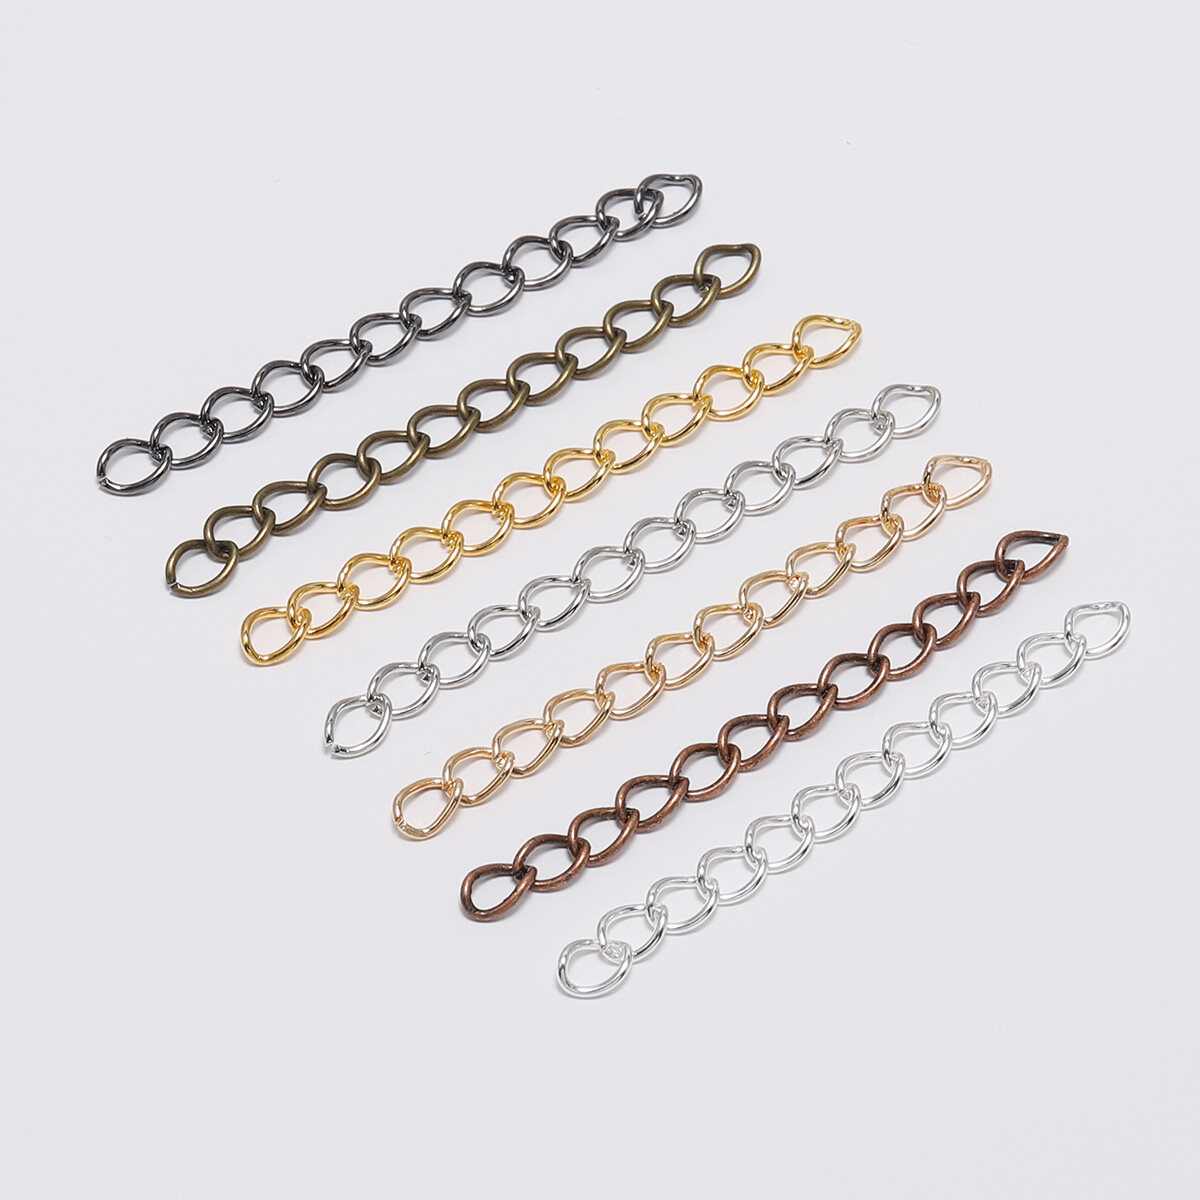 5x Bracelet Extender Clasp Fold Over Necklace Extenders Crystal Rhinestone  Extender Plated Extension Clasps for Jewelry